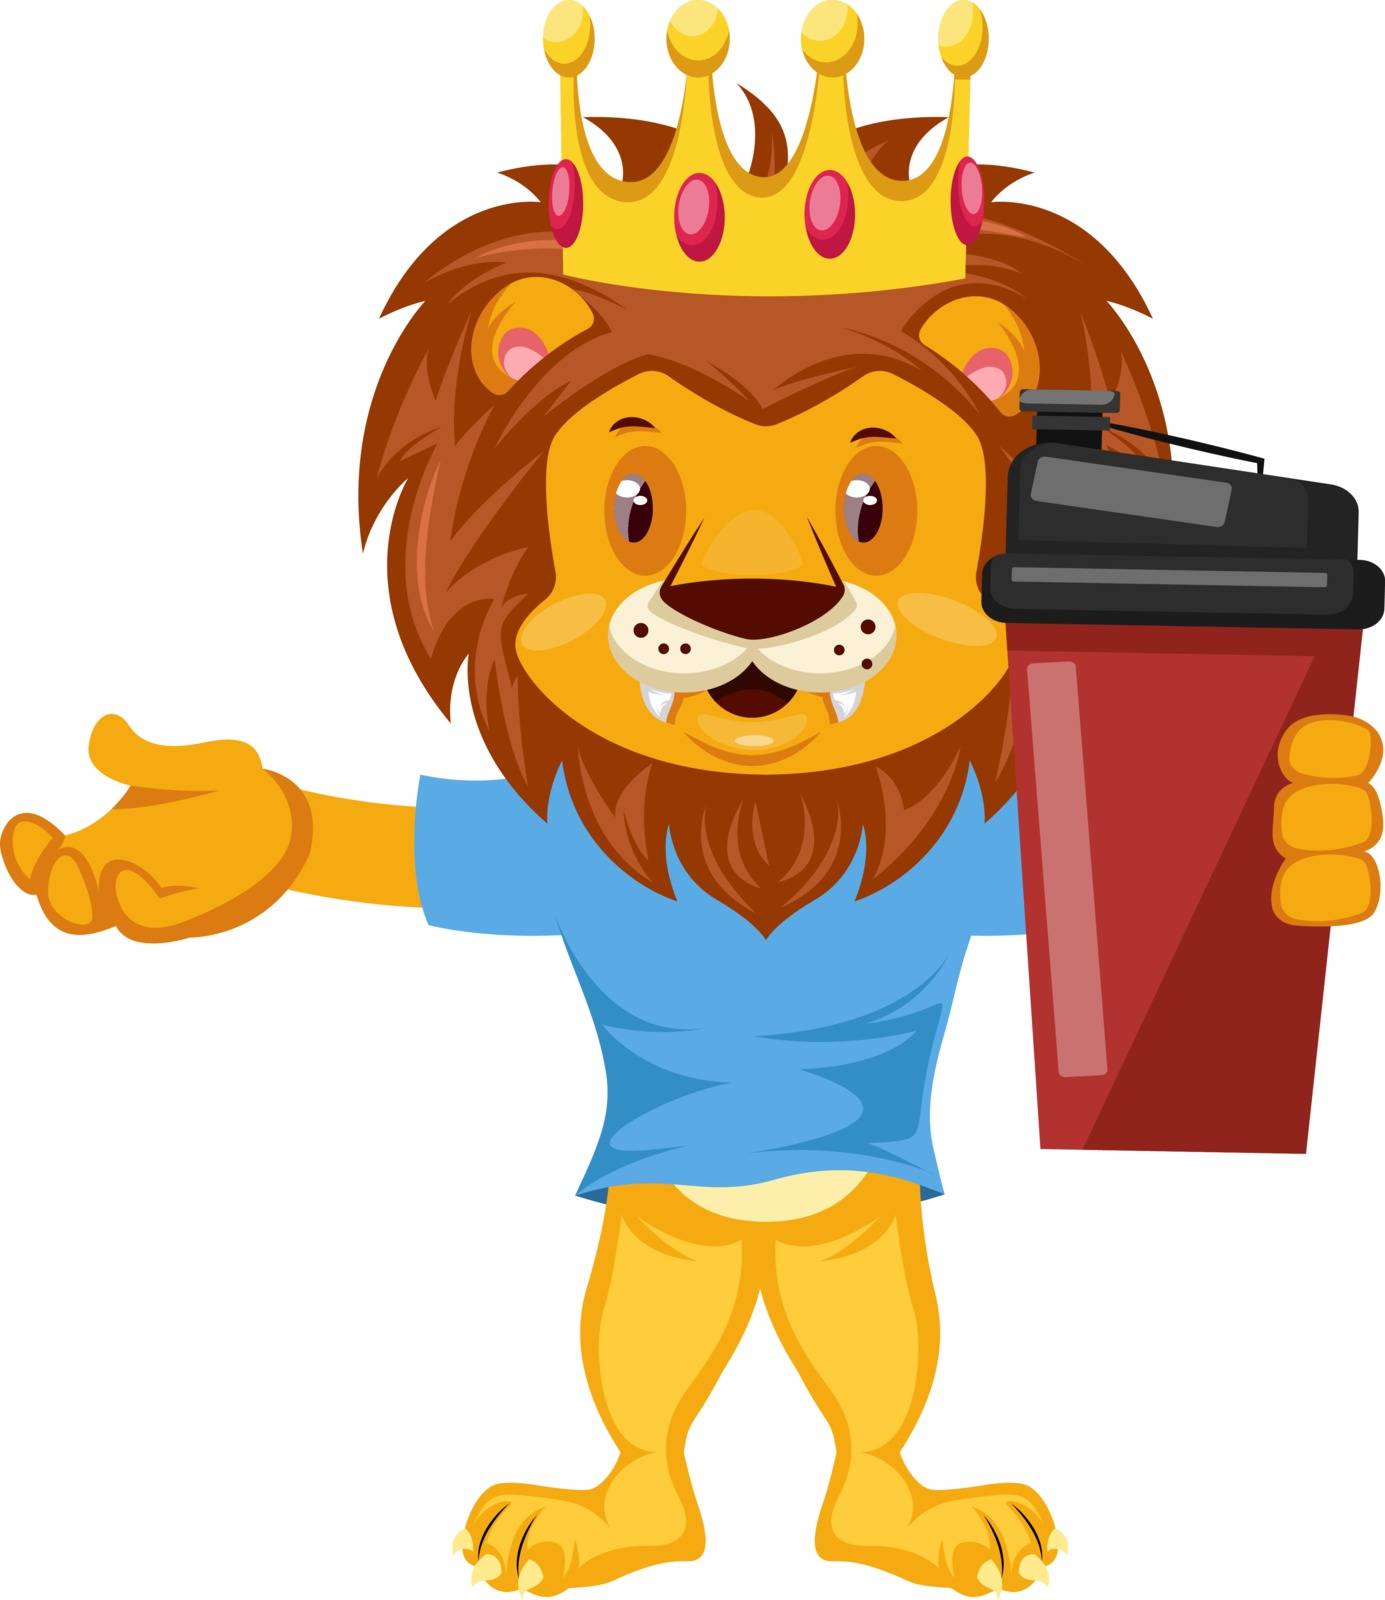 Lion with thermos, illustration, vector on white background.